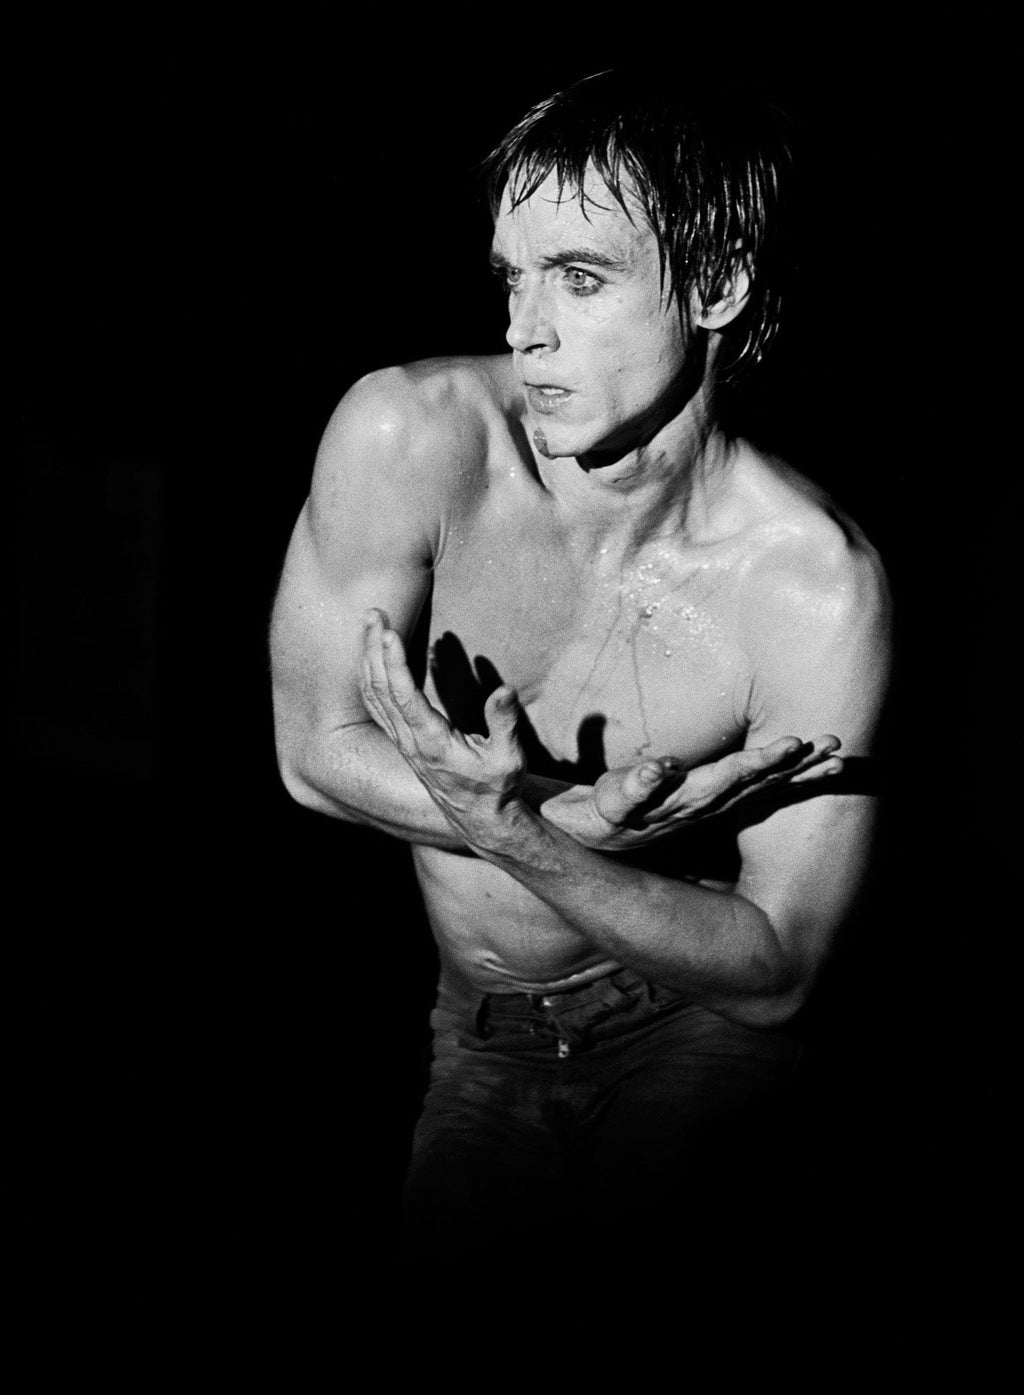 Iggy Pop, Daddy's Dancehall, Copenhagen 1977. Comes with and is included in the Box & Book 'Raw Power'. Fine-art photography Mats Bäcker 